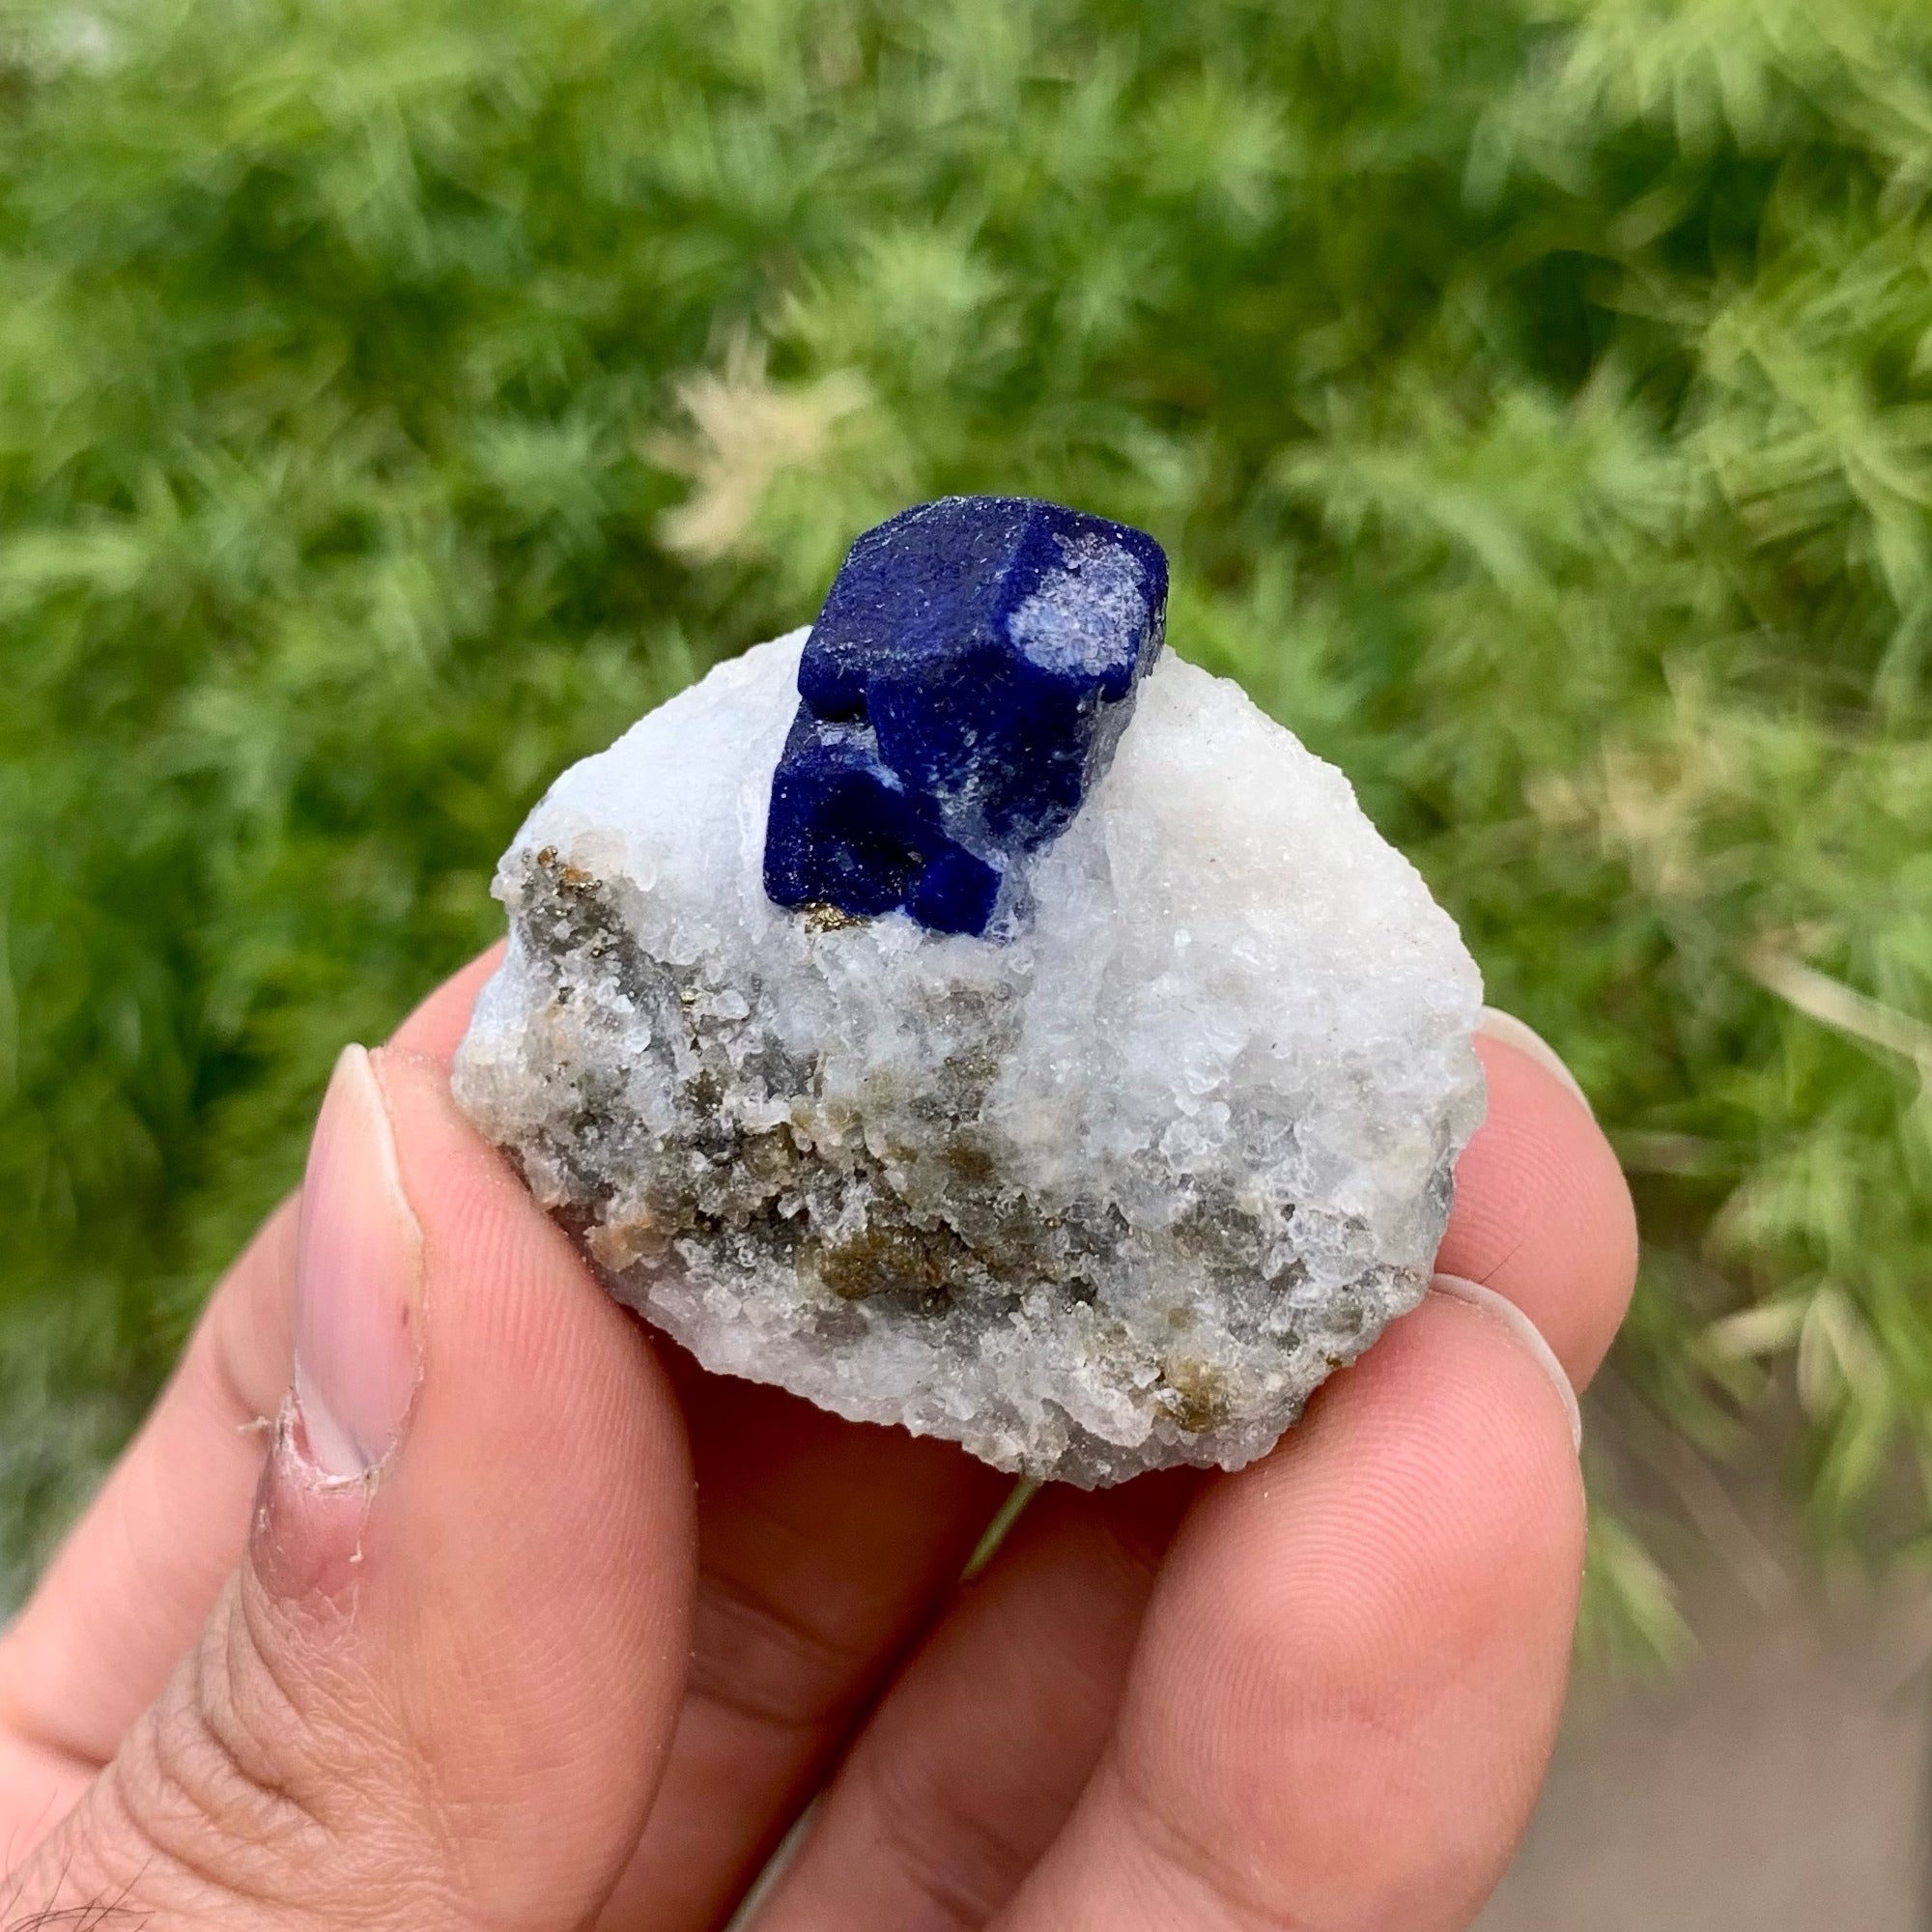 Adorable Focal Crystal Of Lazurite Nicely Positioned On Calcite Matrix